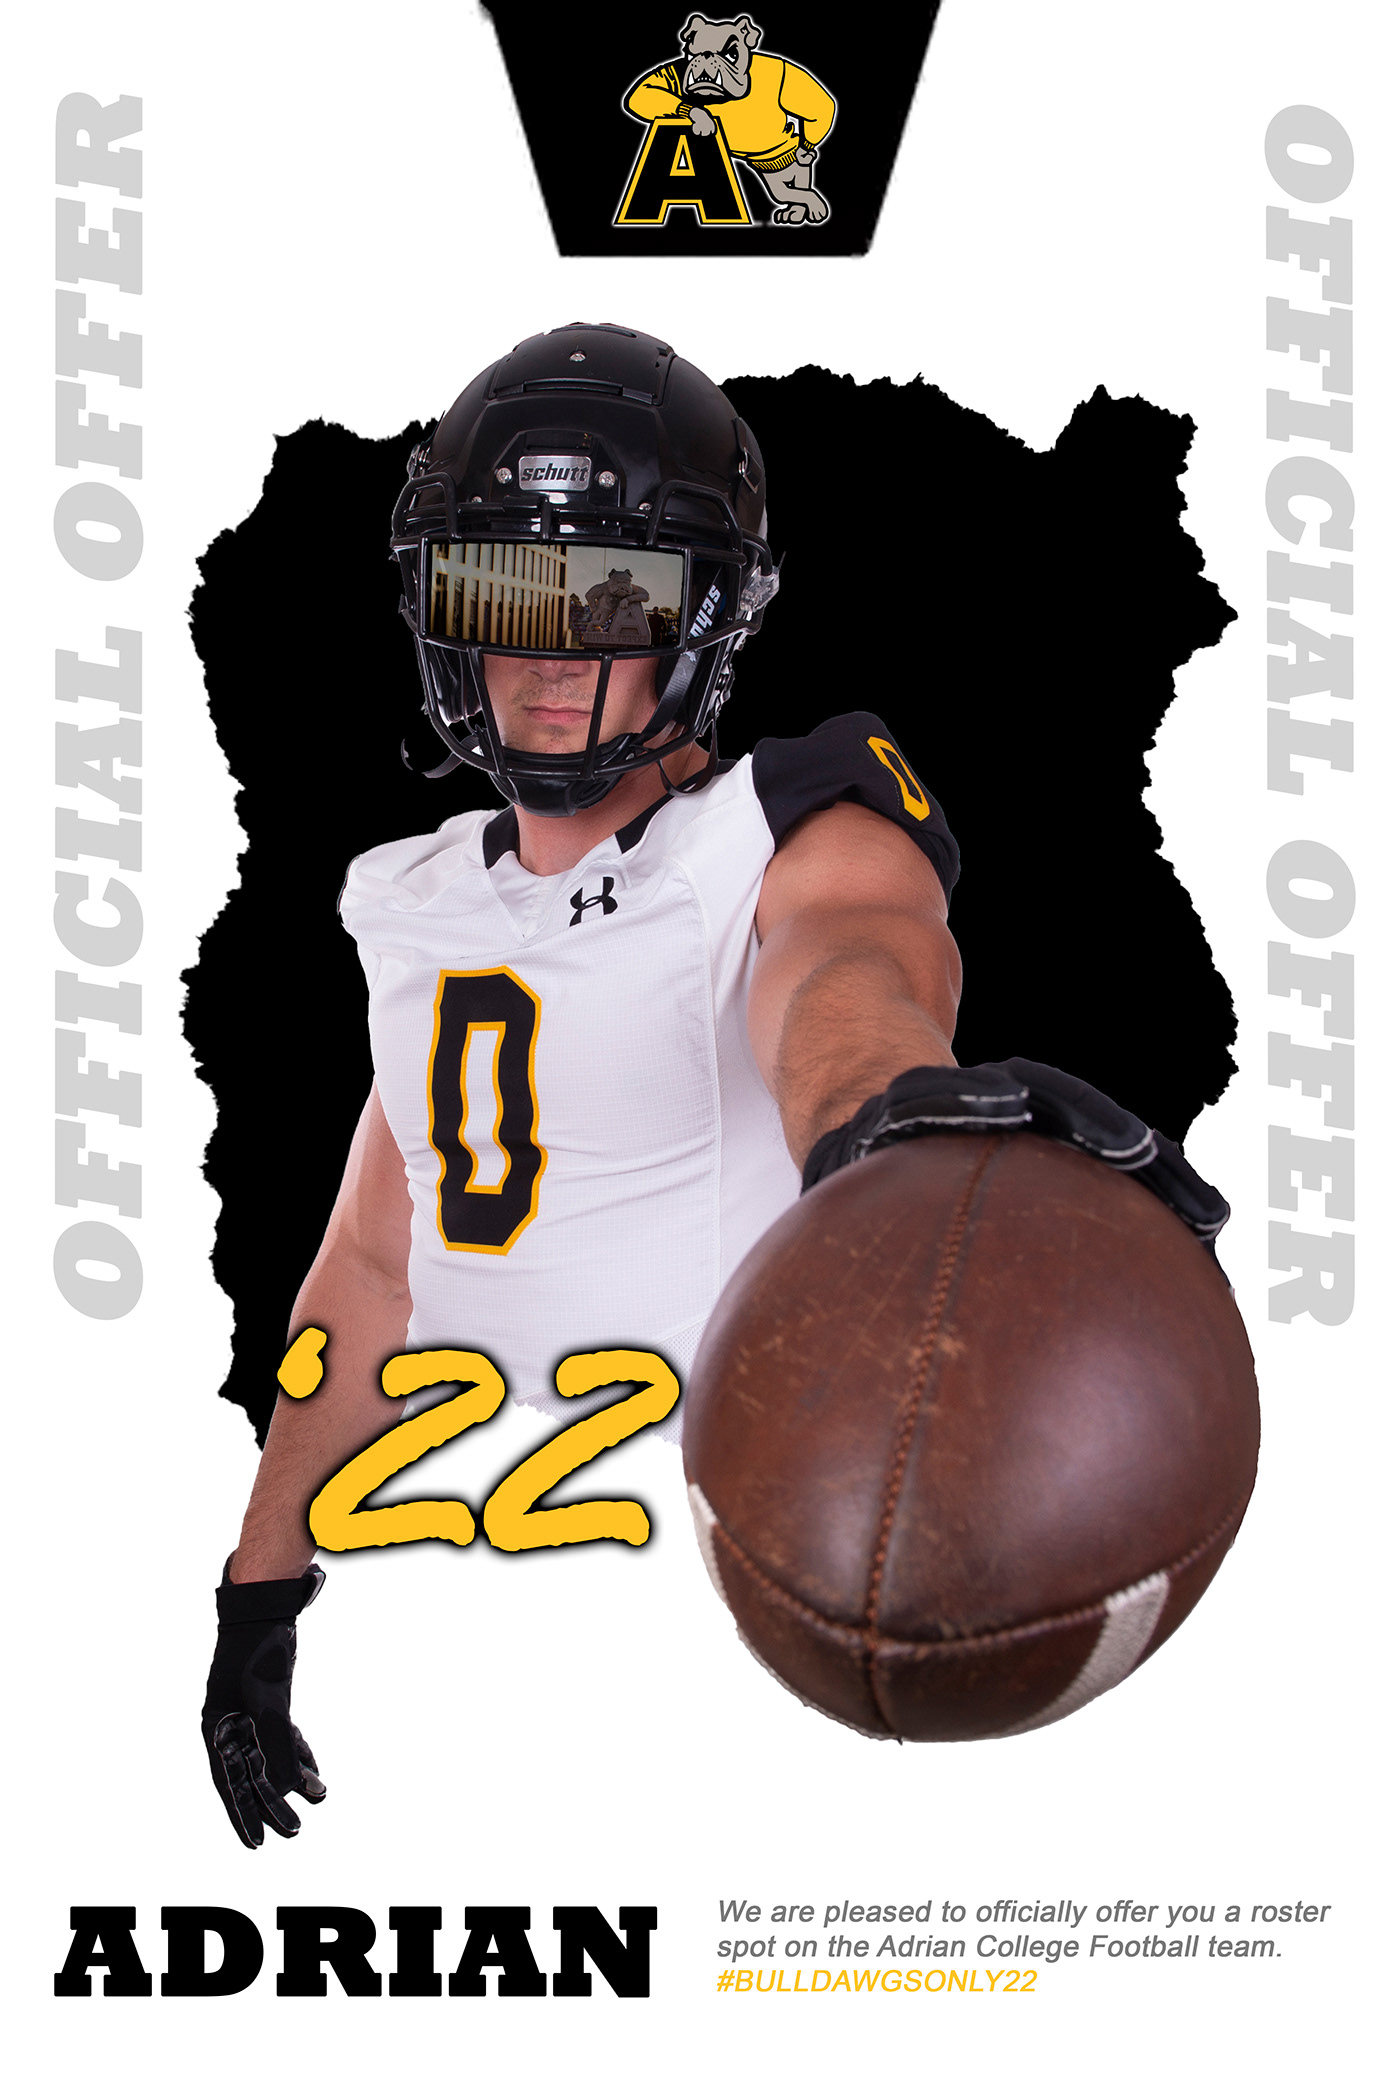 adrian college committed football